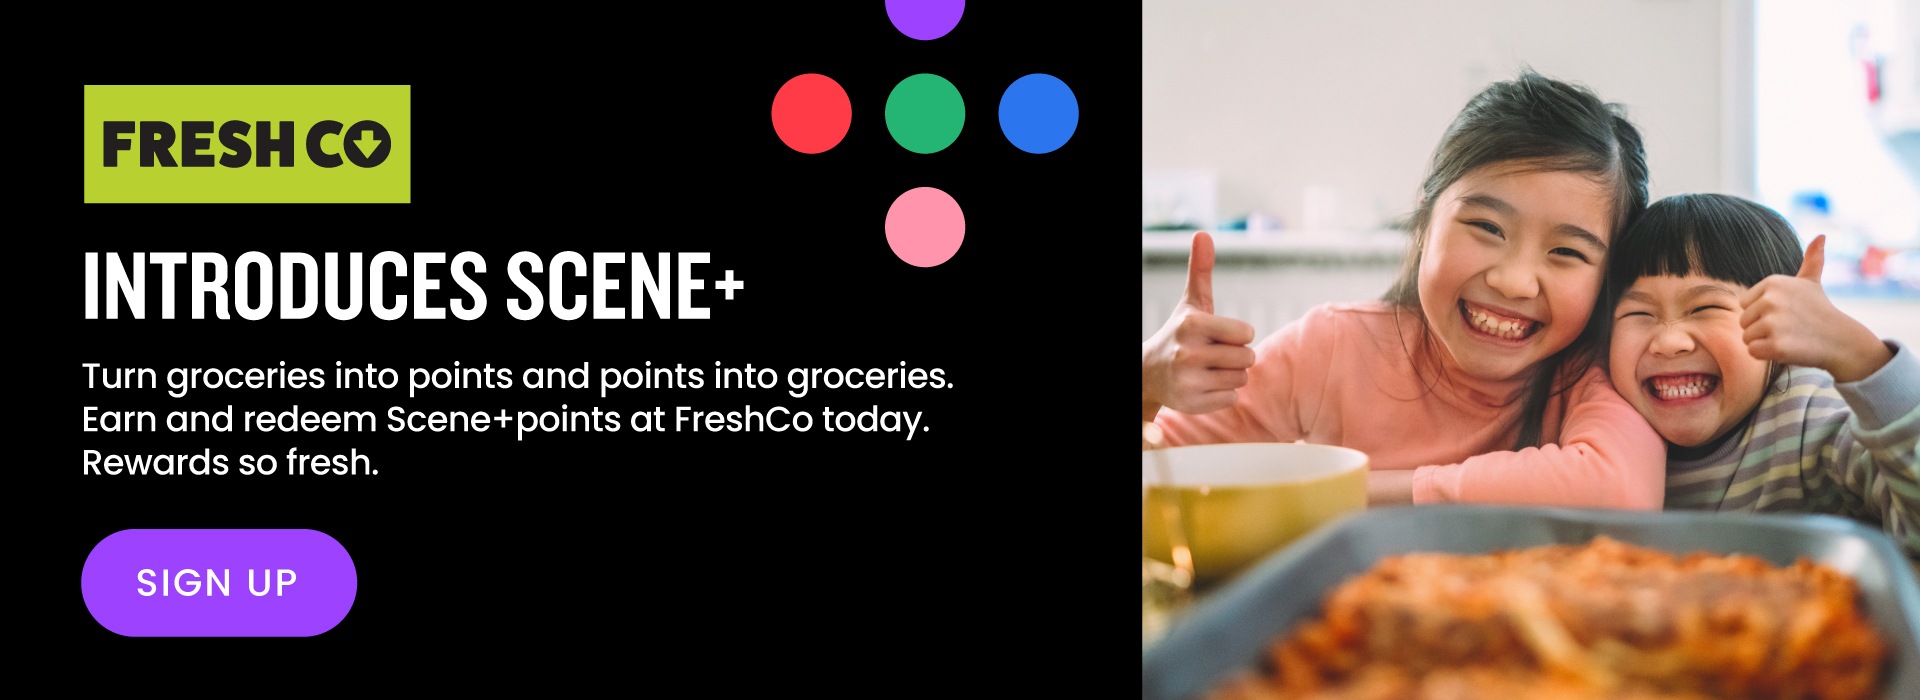 Text Reading 'Fresh Co introduces Scene+. Turn groceries into points and points into groceries. Earn and redeem Scene+ points at FreshCo today. Rewards so fresh. Click on "Sign Up" button to get started.'